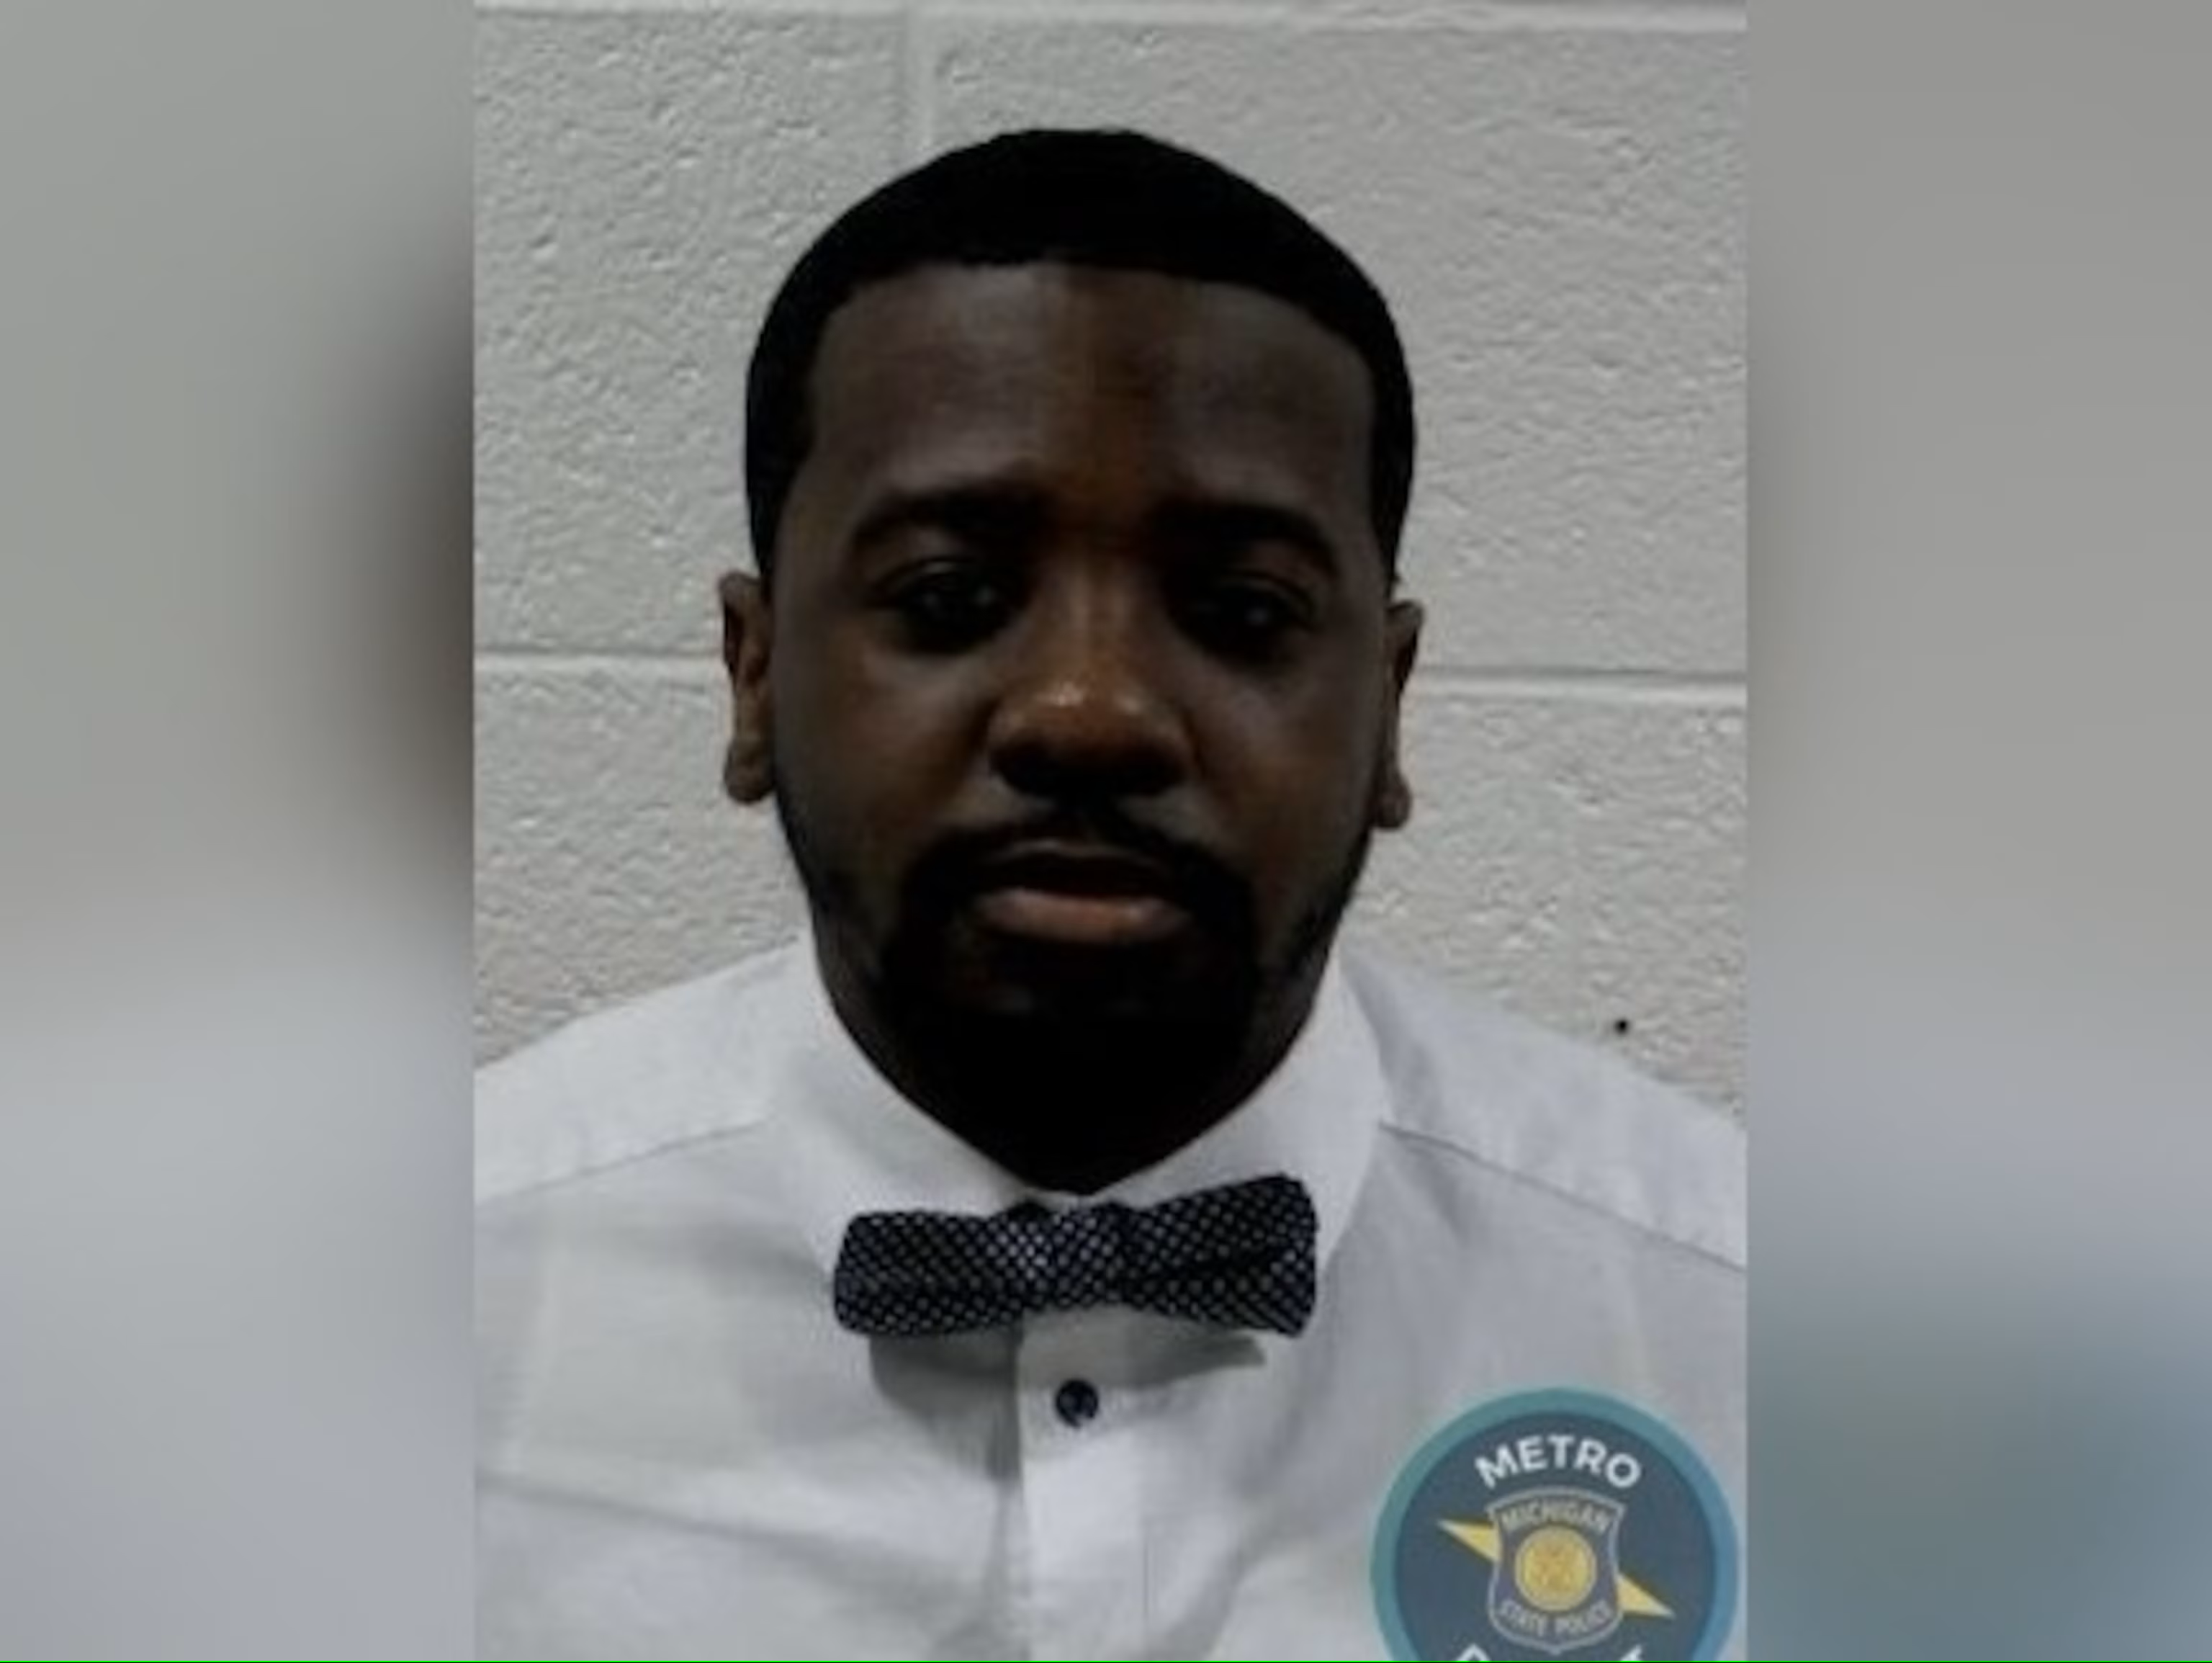 Juwan Marquise-Alexander Brown, 29, has been suspended from the force and could serve around 15 years in jail